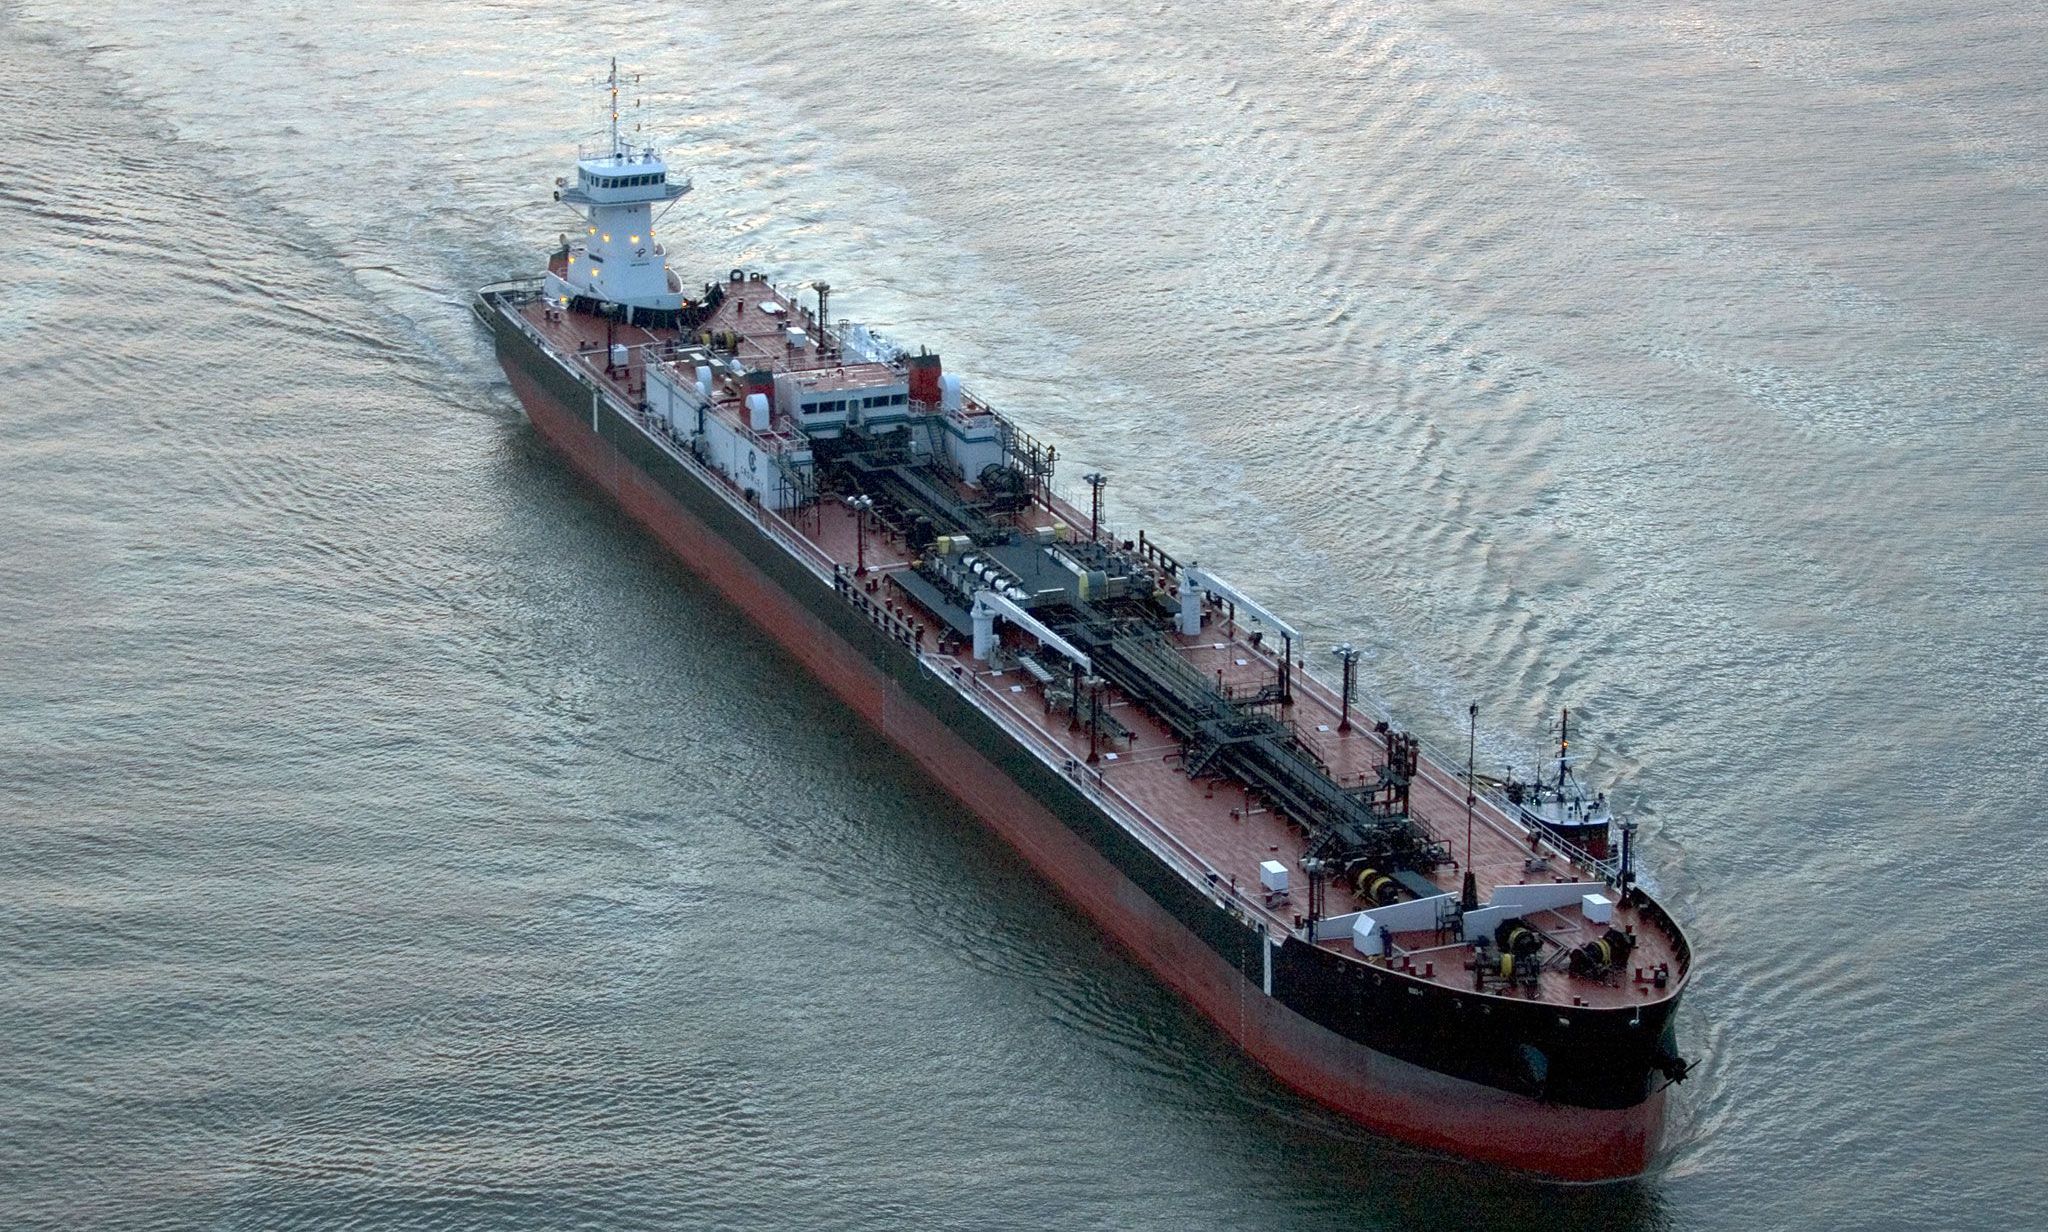 Crowley's articulated tug-barge (ATB) Pacific Reliance. Photo courtesy Crowley